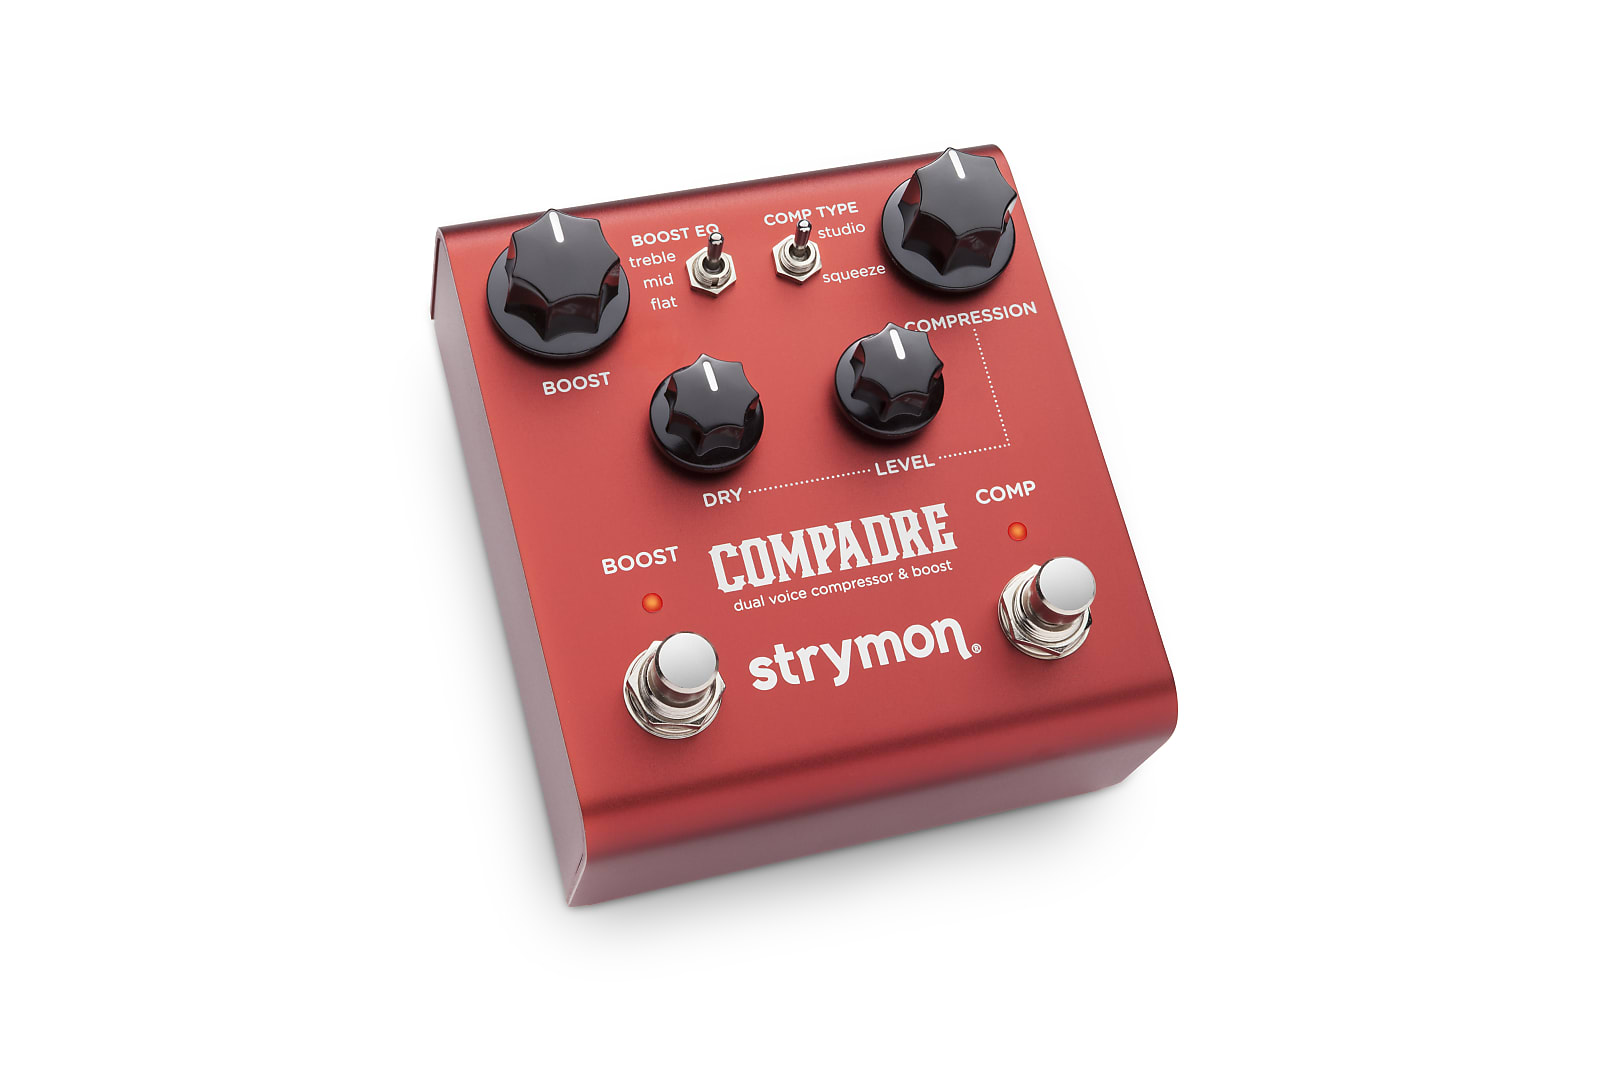 Strymon Compadre Dual Voice Compressor & Boost Effects Pedal